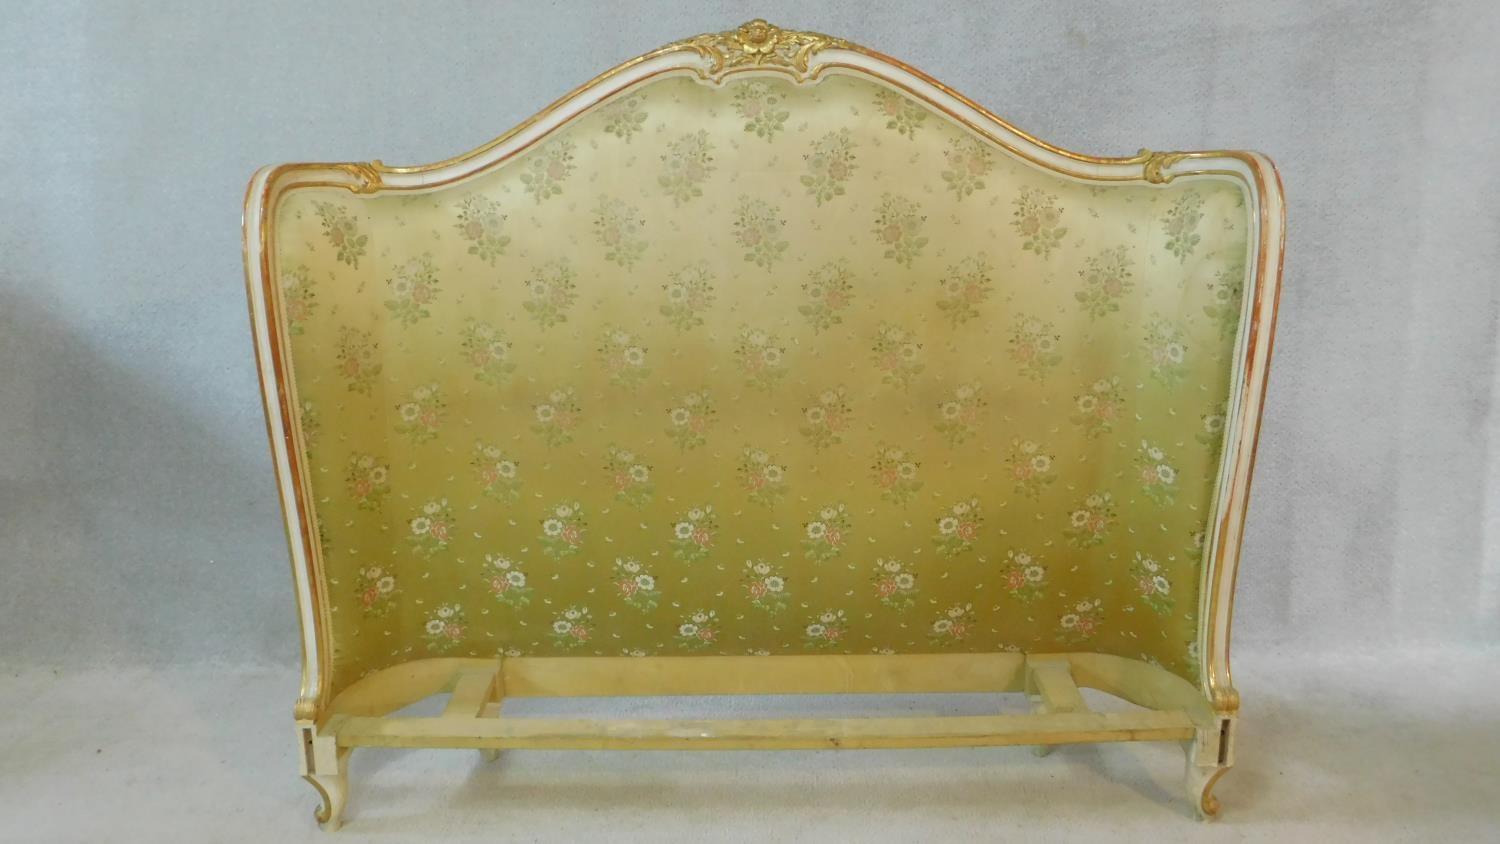 A mid century gilt and white painted bed head in floral damask resting on carved cabriole